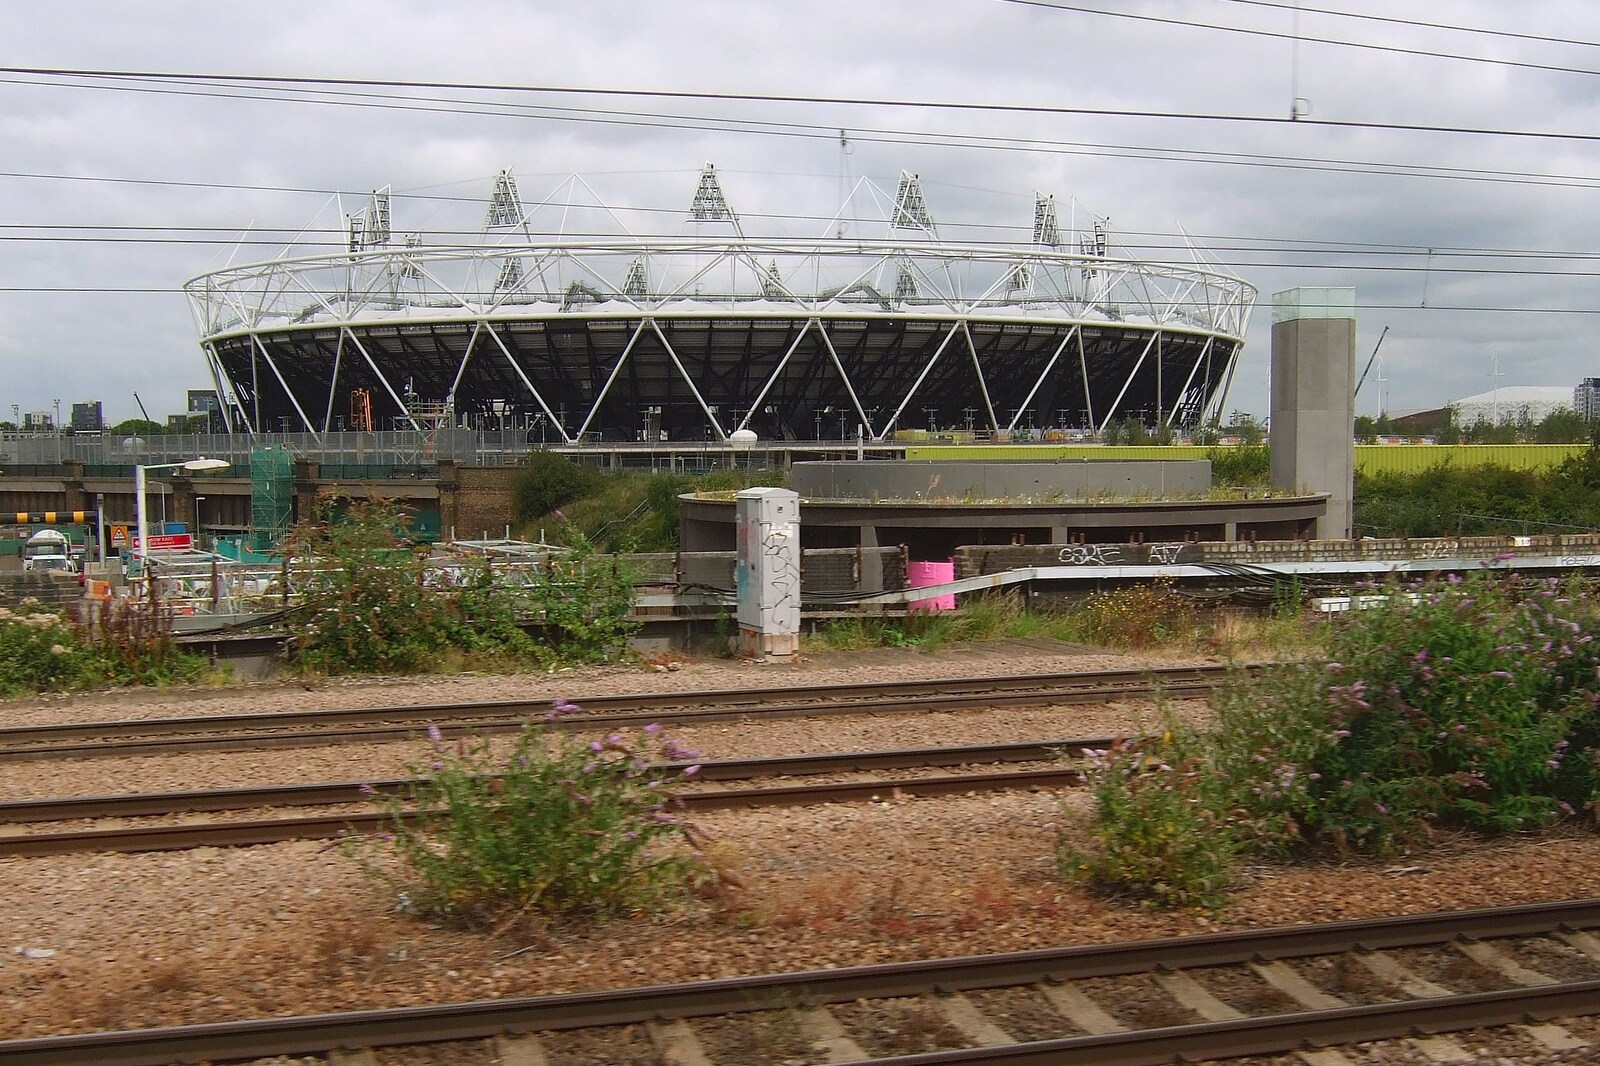 The main Olympics atheltics venue from On the Rails, and a Kebab, Stratford and Diss, Norfolk - 31st July 2011